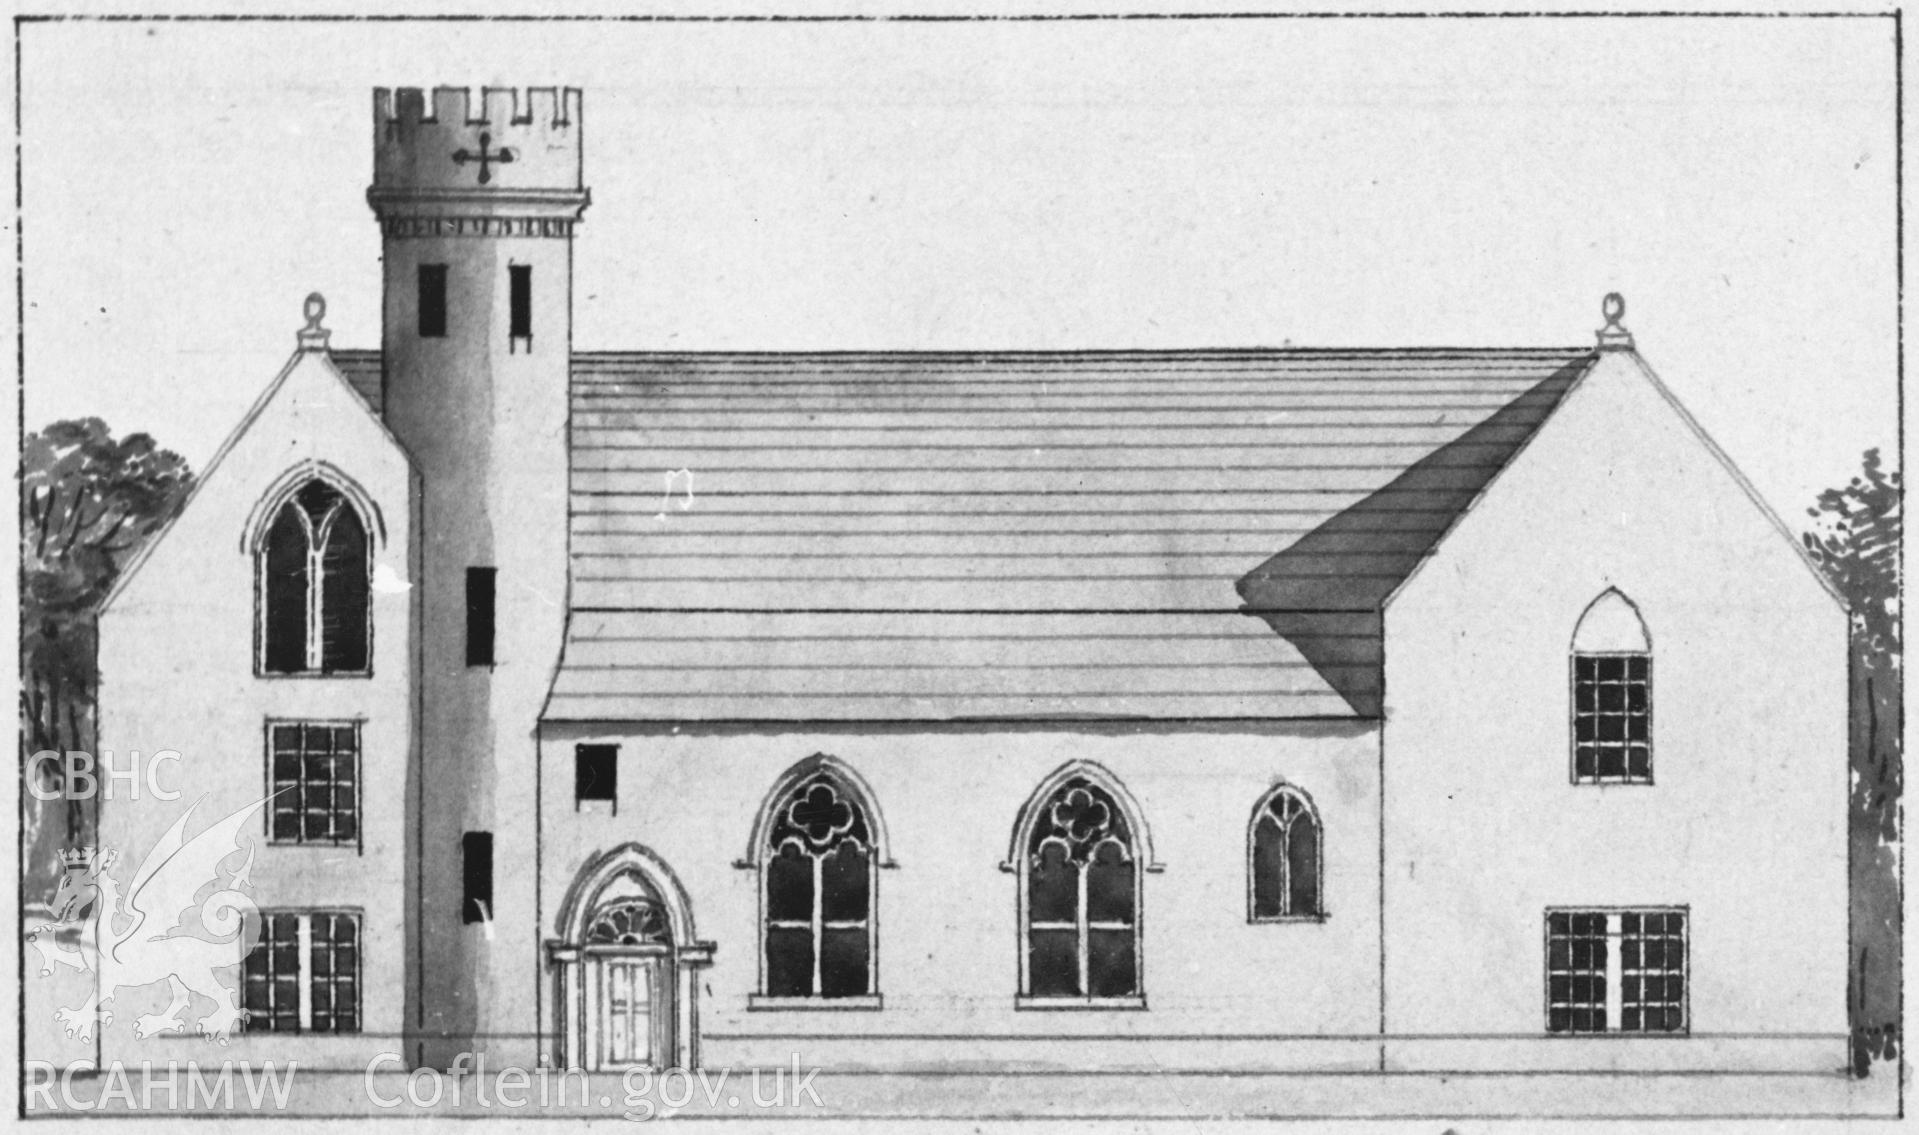 Digital copy of an elevation drawing of Penrhyn Castle by M. Griffiths.